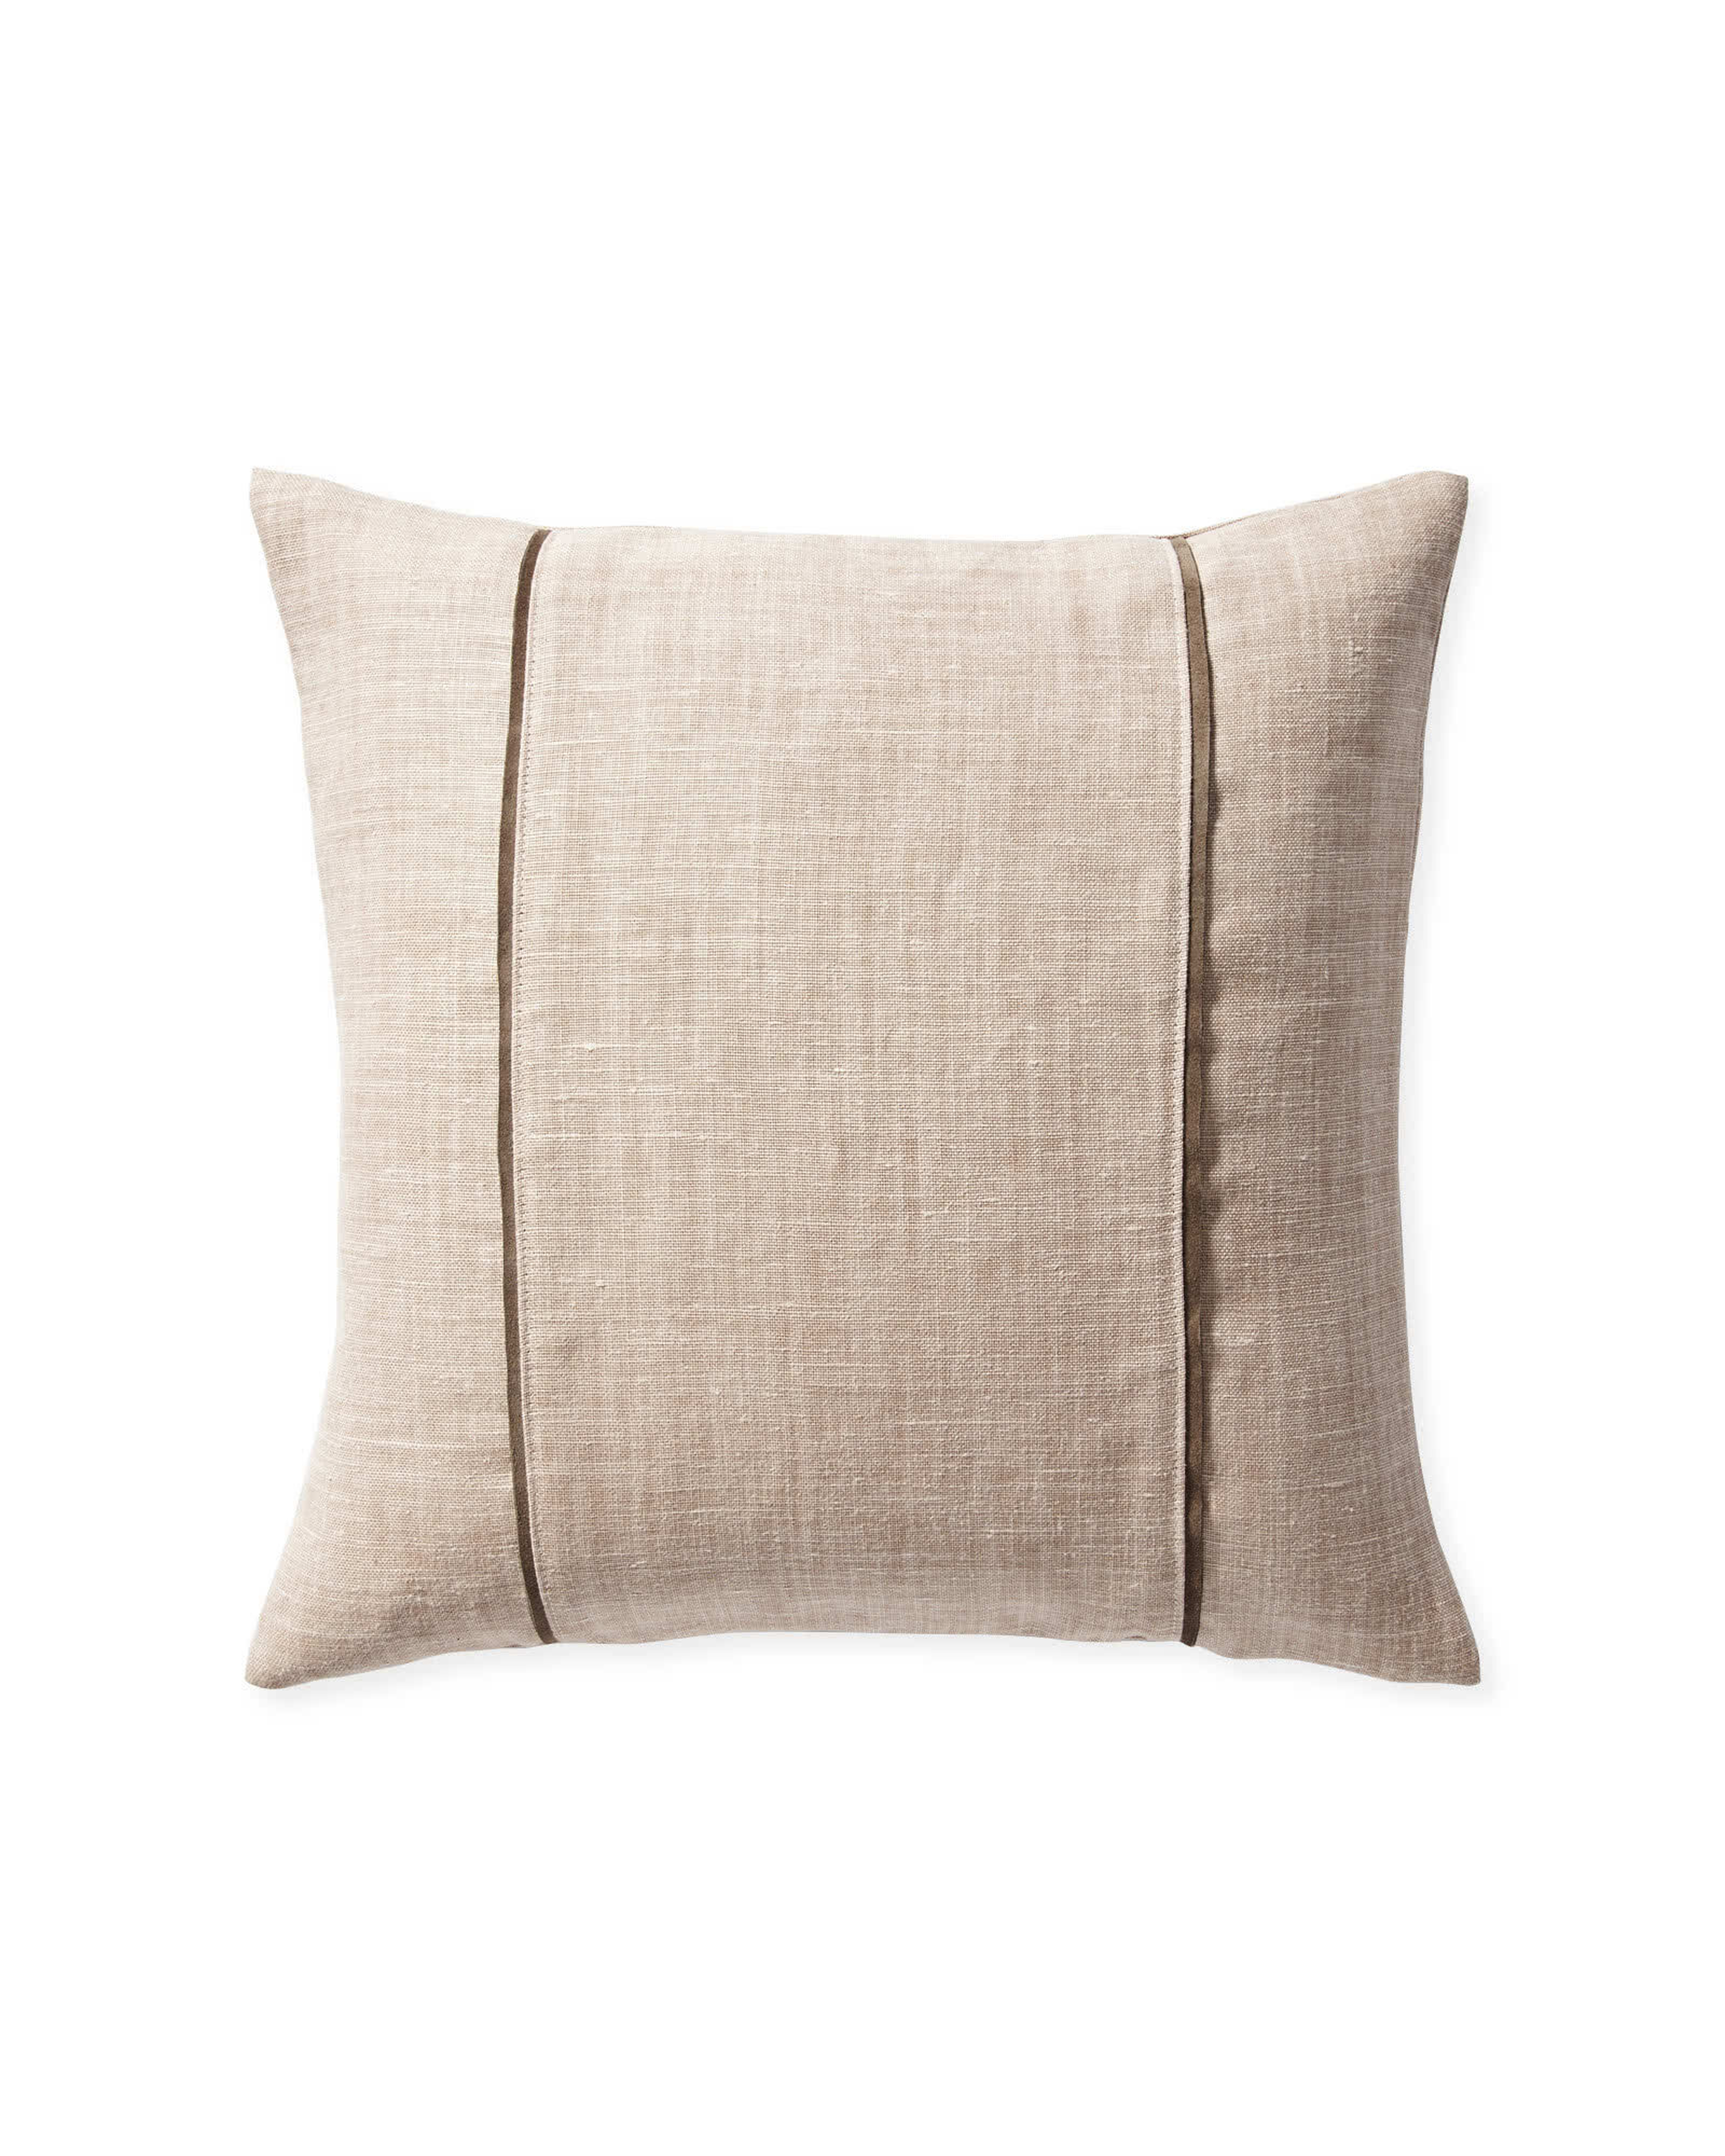 Kentfield Pillow Cover - Serena and Lily